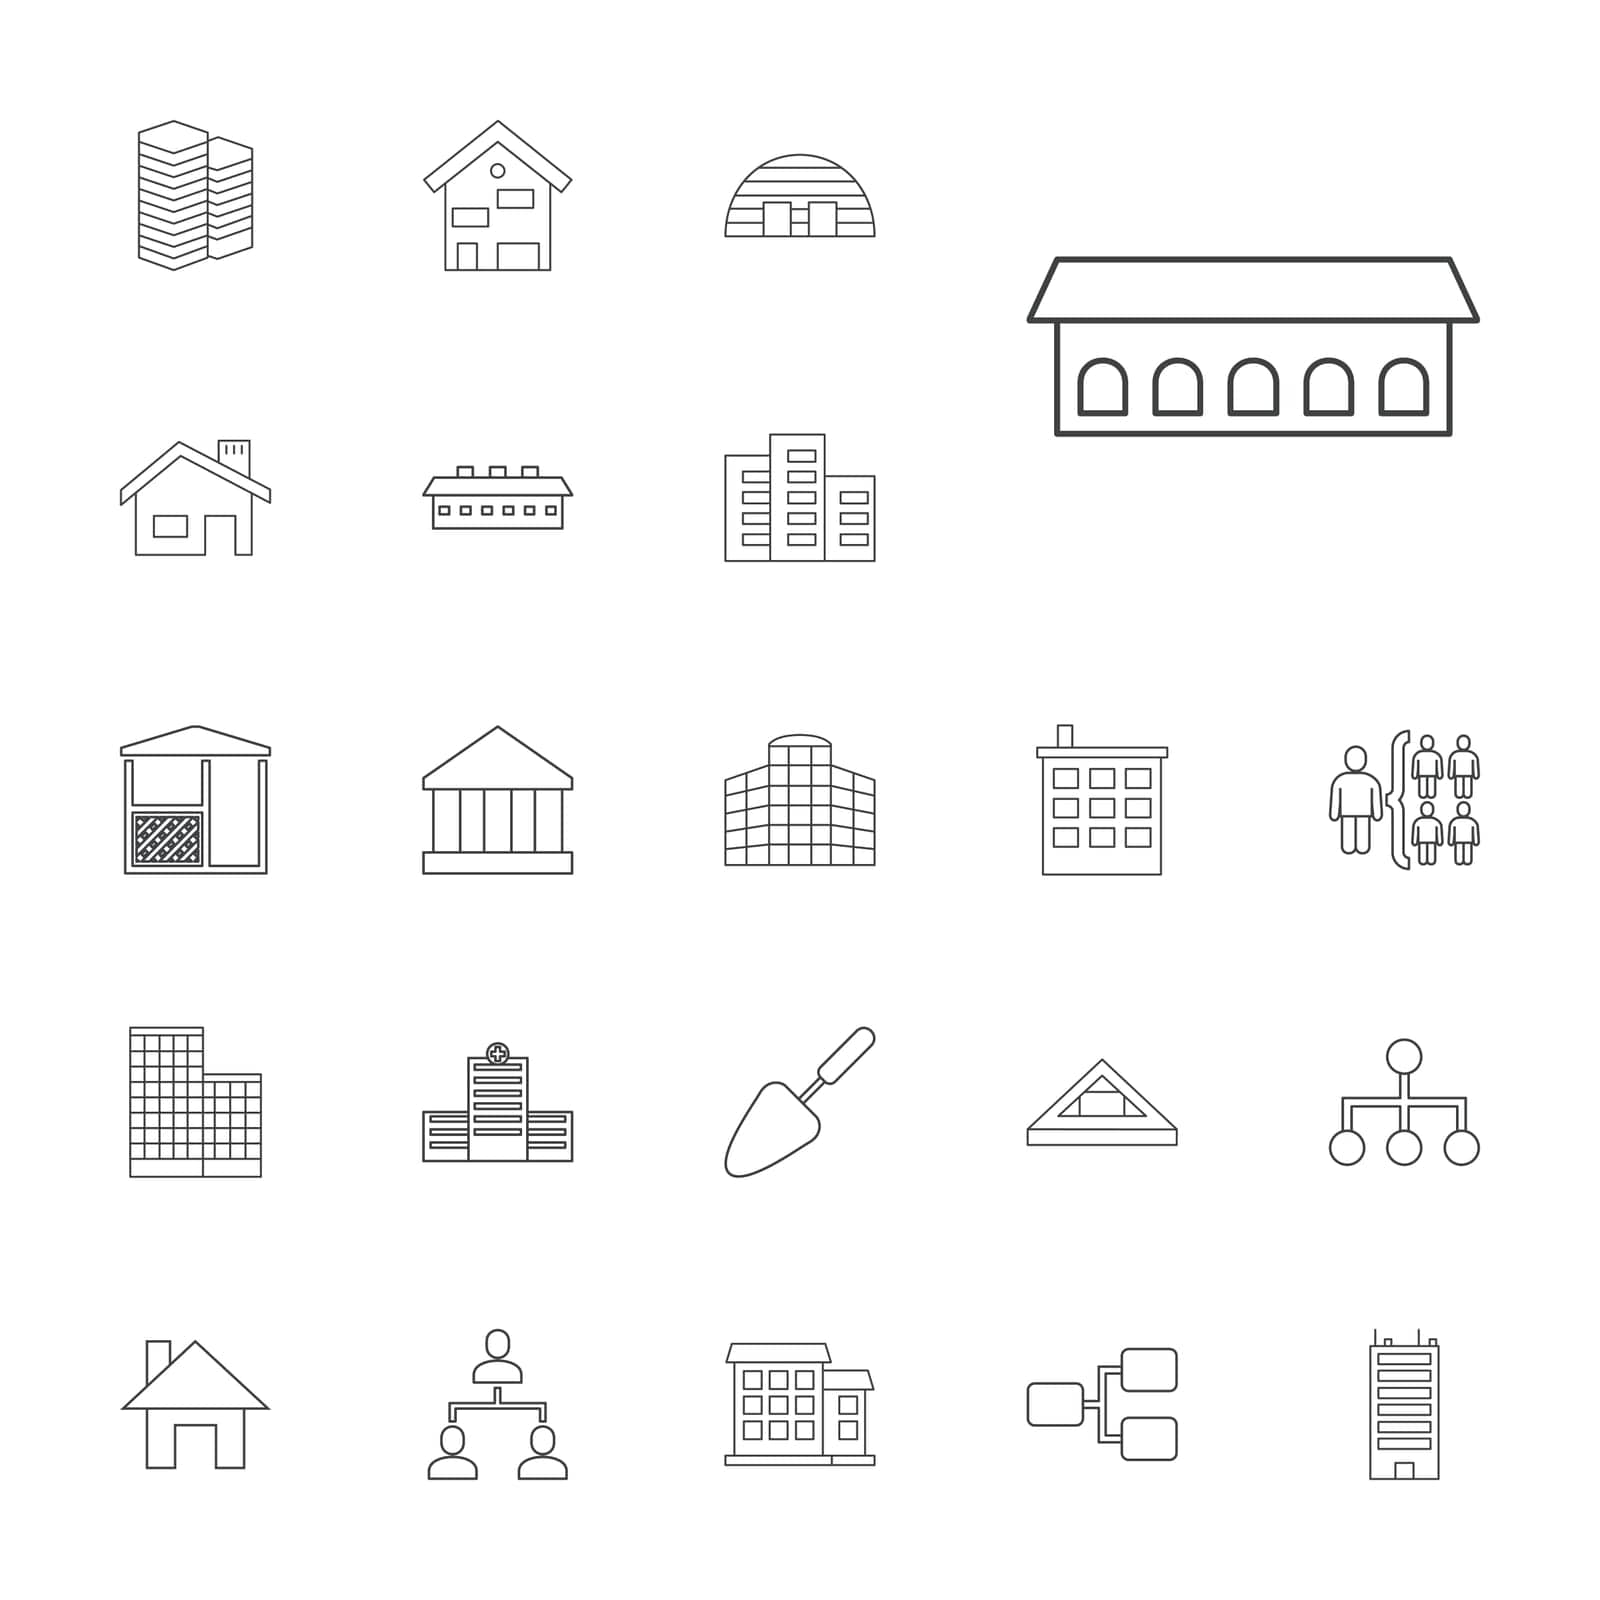 symbol,gazebo,city,concept,icon,sign,isolated,louvre,office,distribution,house,building,retail,bank,government,barn,design,hotel,construction,vector,hospital,tower,element,architecture,trowel,set,business,center,estate,centre,skyscraper,structure,home,headquarters,residential,urban,background,illustration,apartment,object by ogqcorp